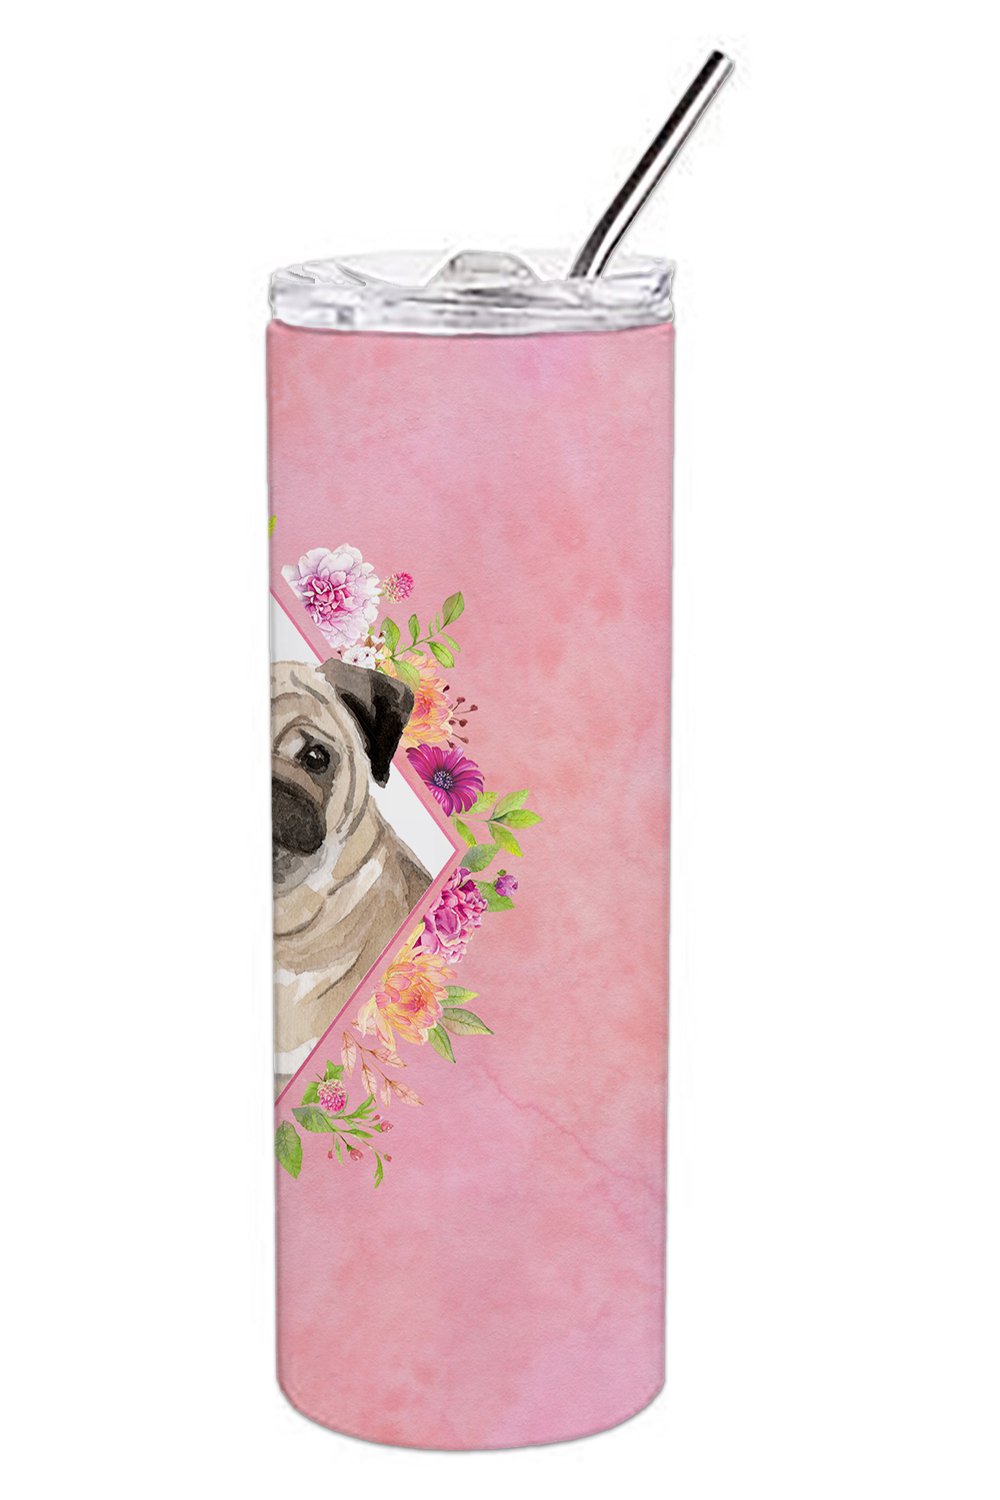 Fawn Pug Pink Flowers Double Walled Stainless Steel 20 oz Skinny Tumbler CK4218TBL20 by Caroline's Treasures